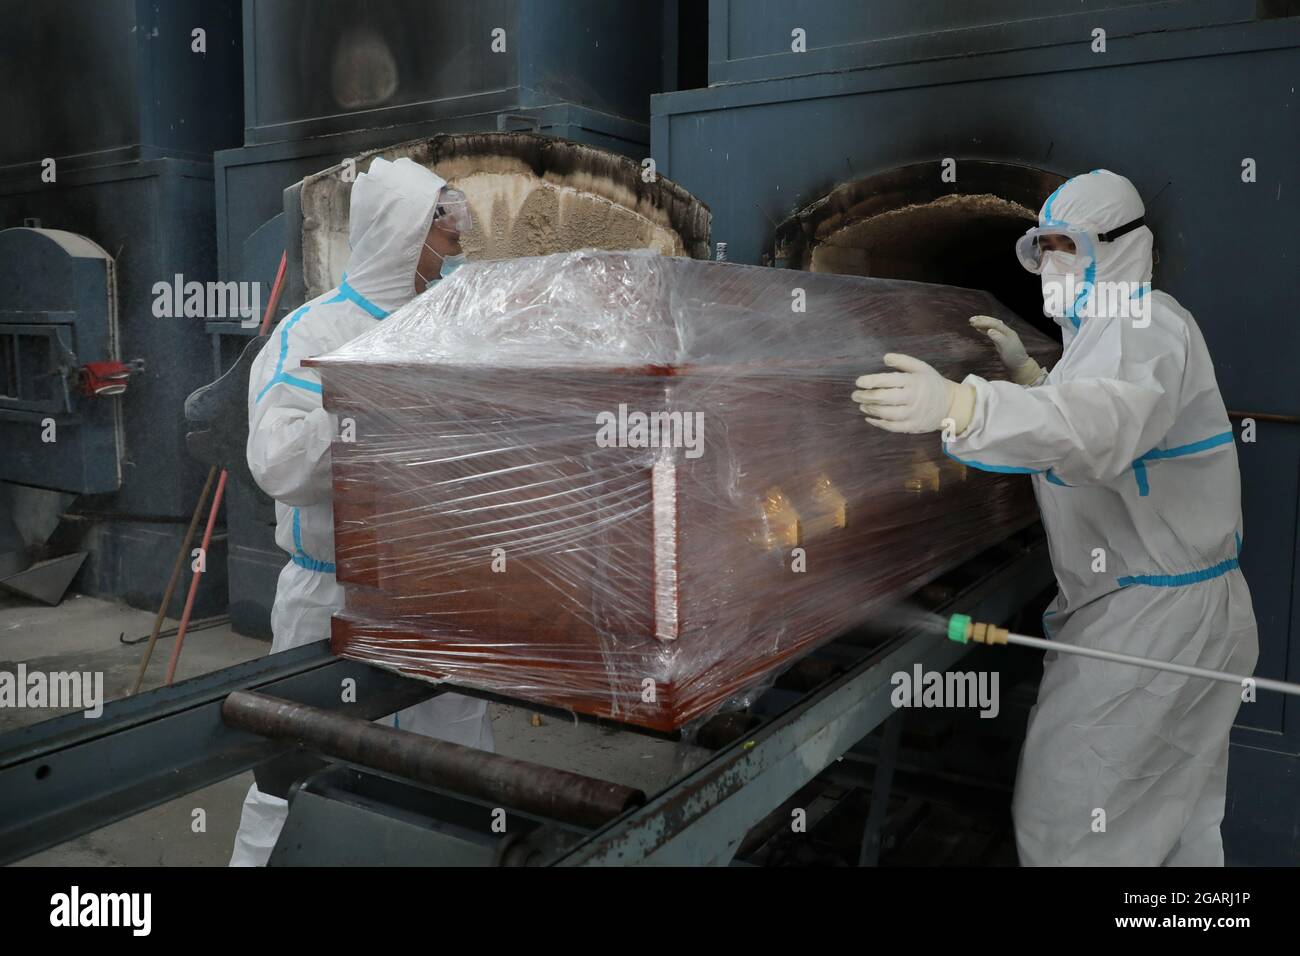 Undertakers from Hock Thai Funeral prepare to cremate the body of a person  who died from the coronavirus disease (COVID-19), at a crematorium in  Klang, Malaysia August 1, 2021. REUTERS/Lim Huey Teng